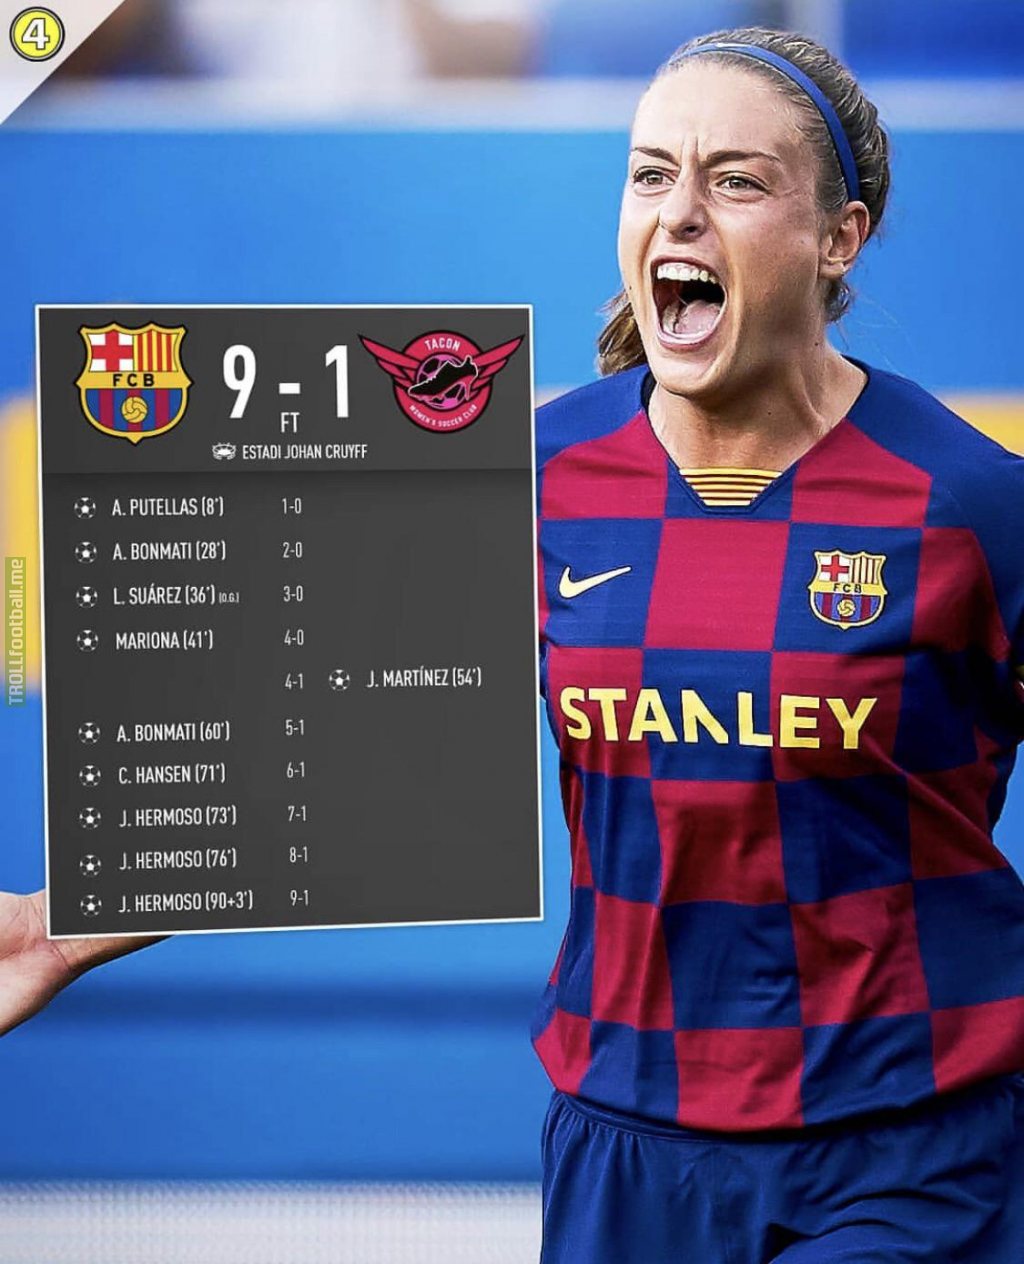 In the first ever Women’s Clásico, FCB Femeni beat Real Madrid’s Women’s team by 9-1.